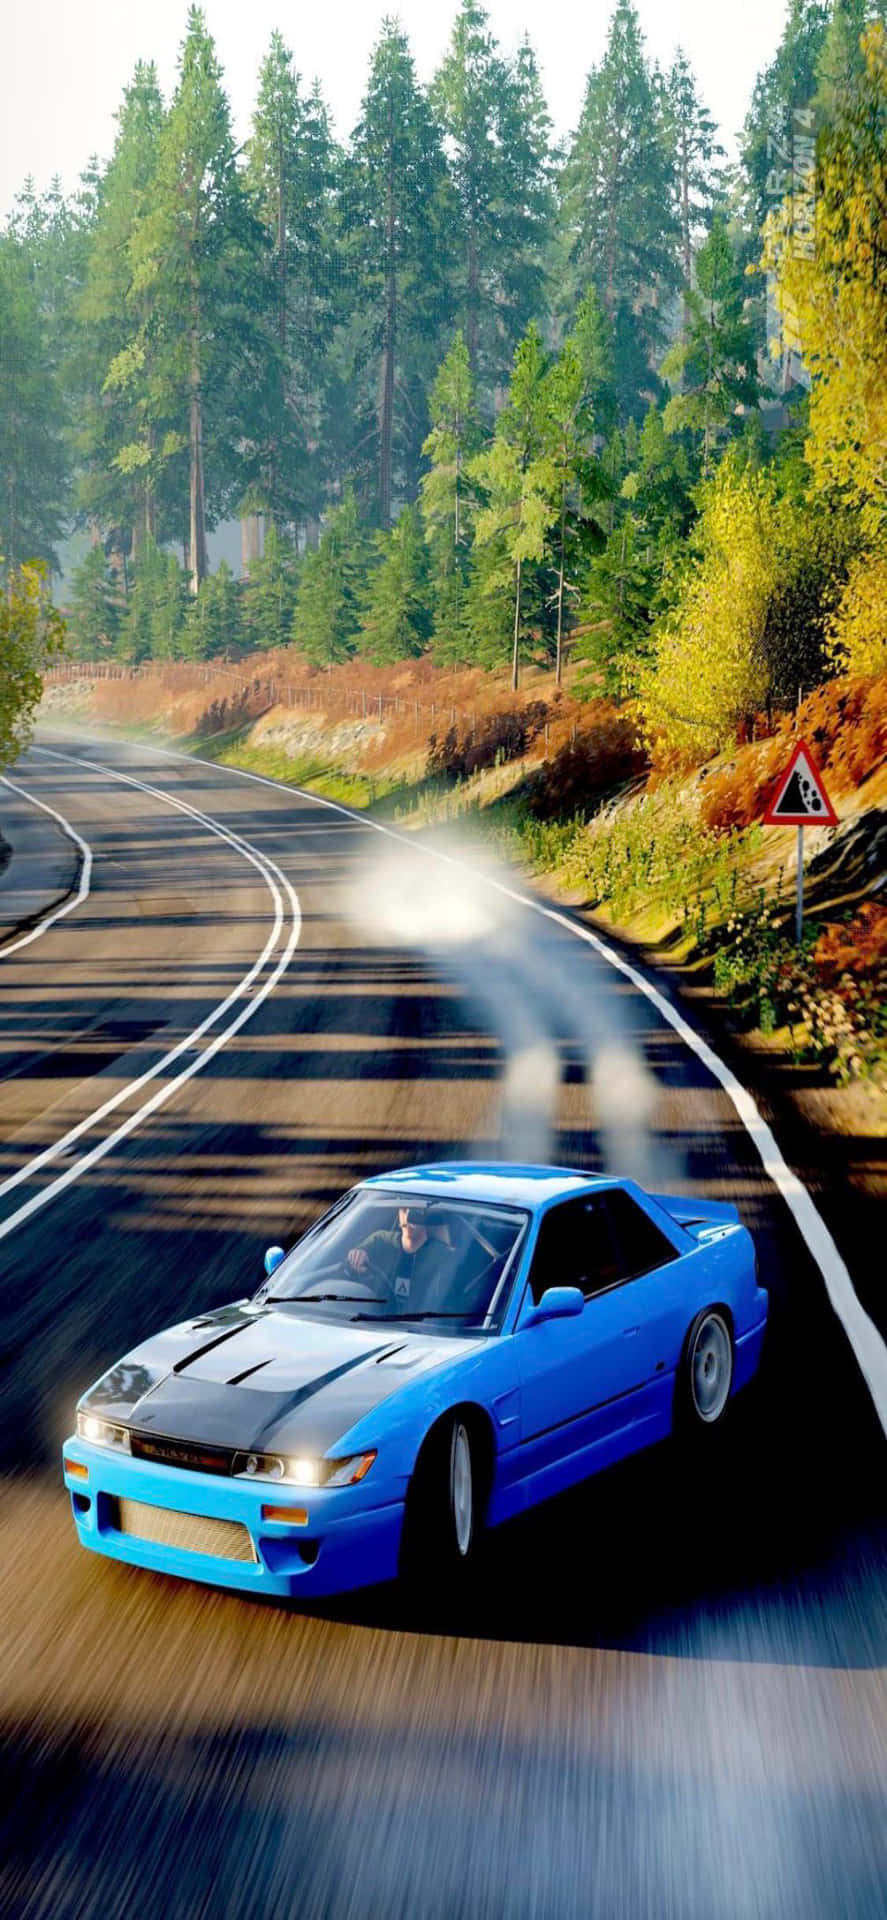 Enjoy the Thrill of the Open Road with Iphone Xs and Forza Horizon 4